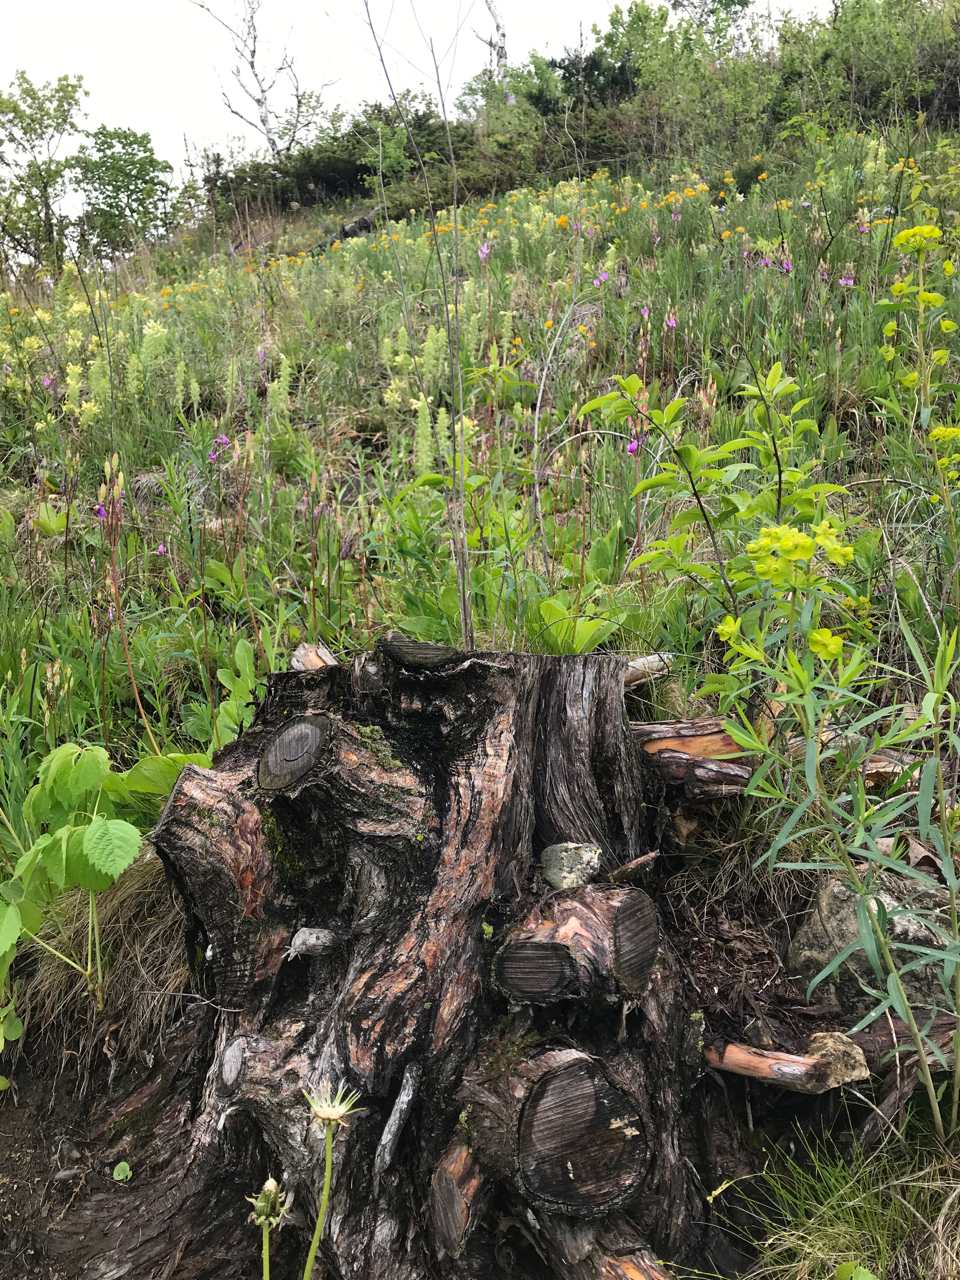 A blackened stump is surrounded by fresh growth on a hillside.